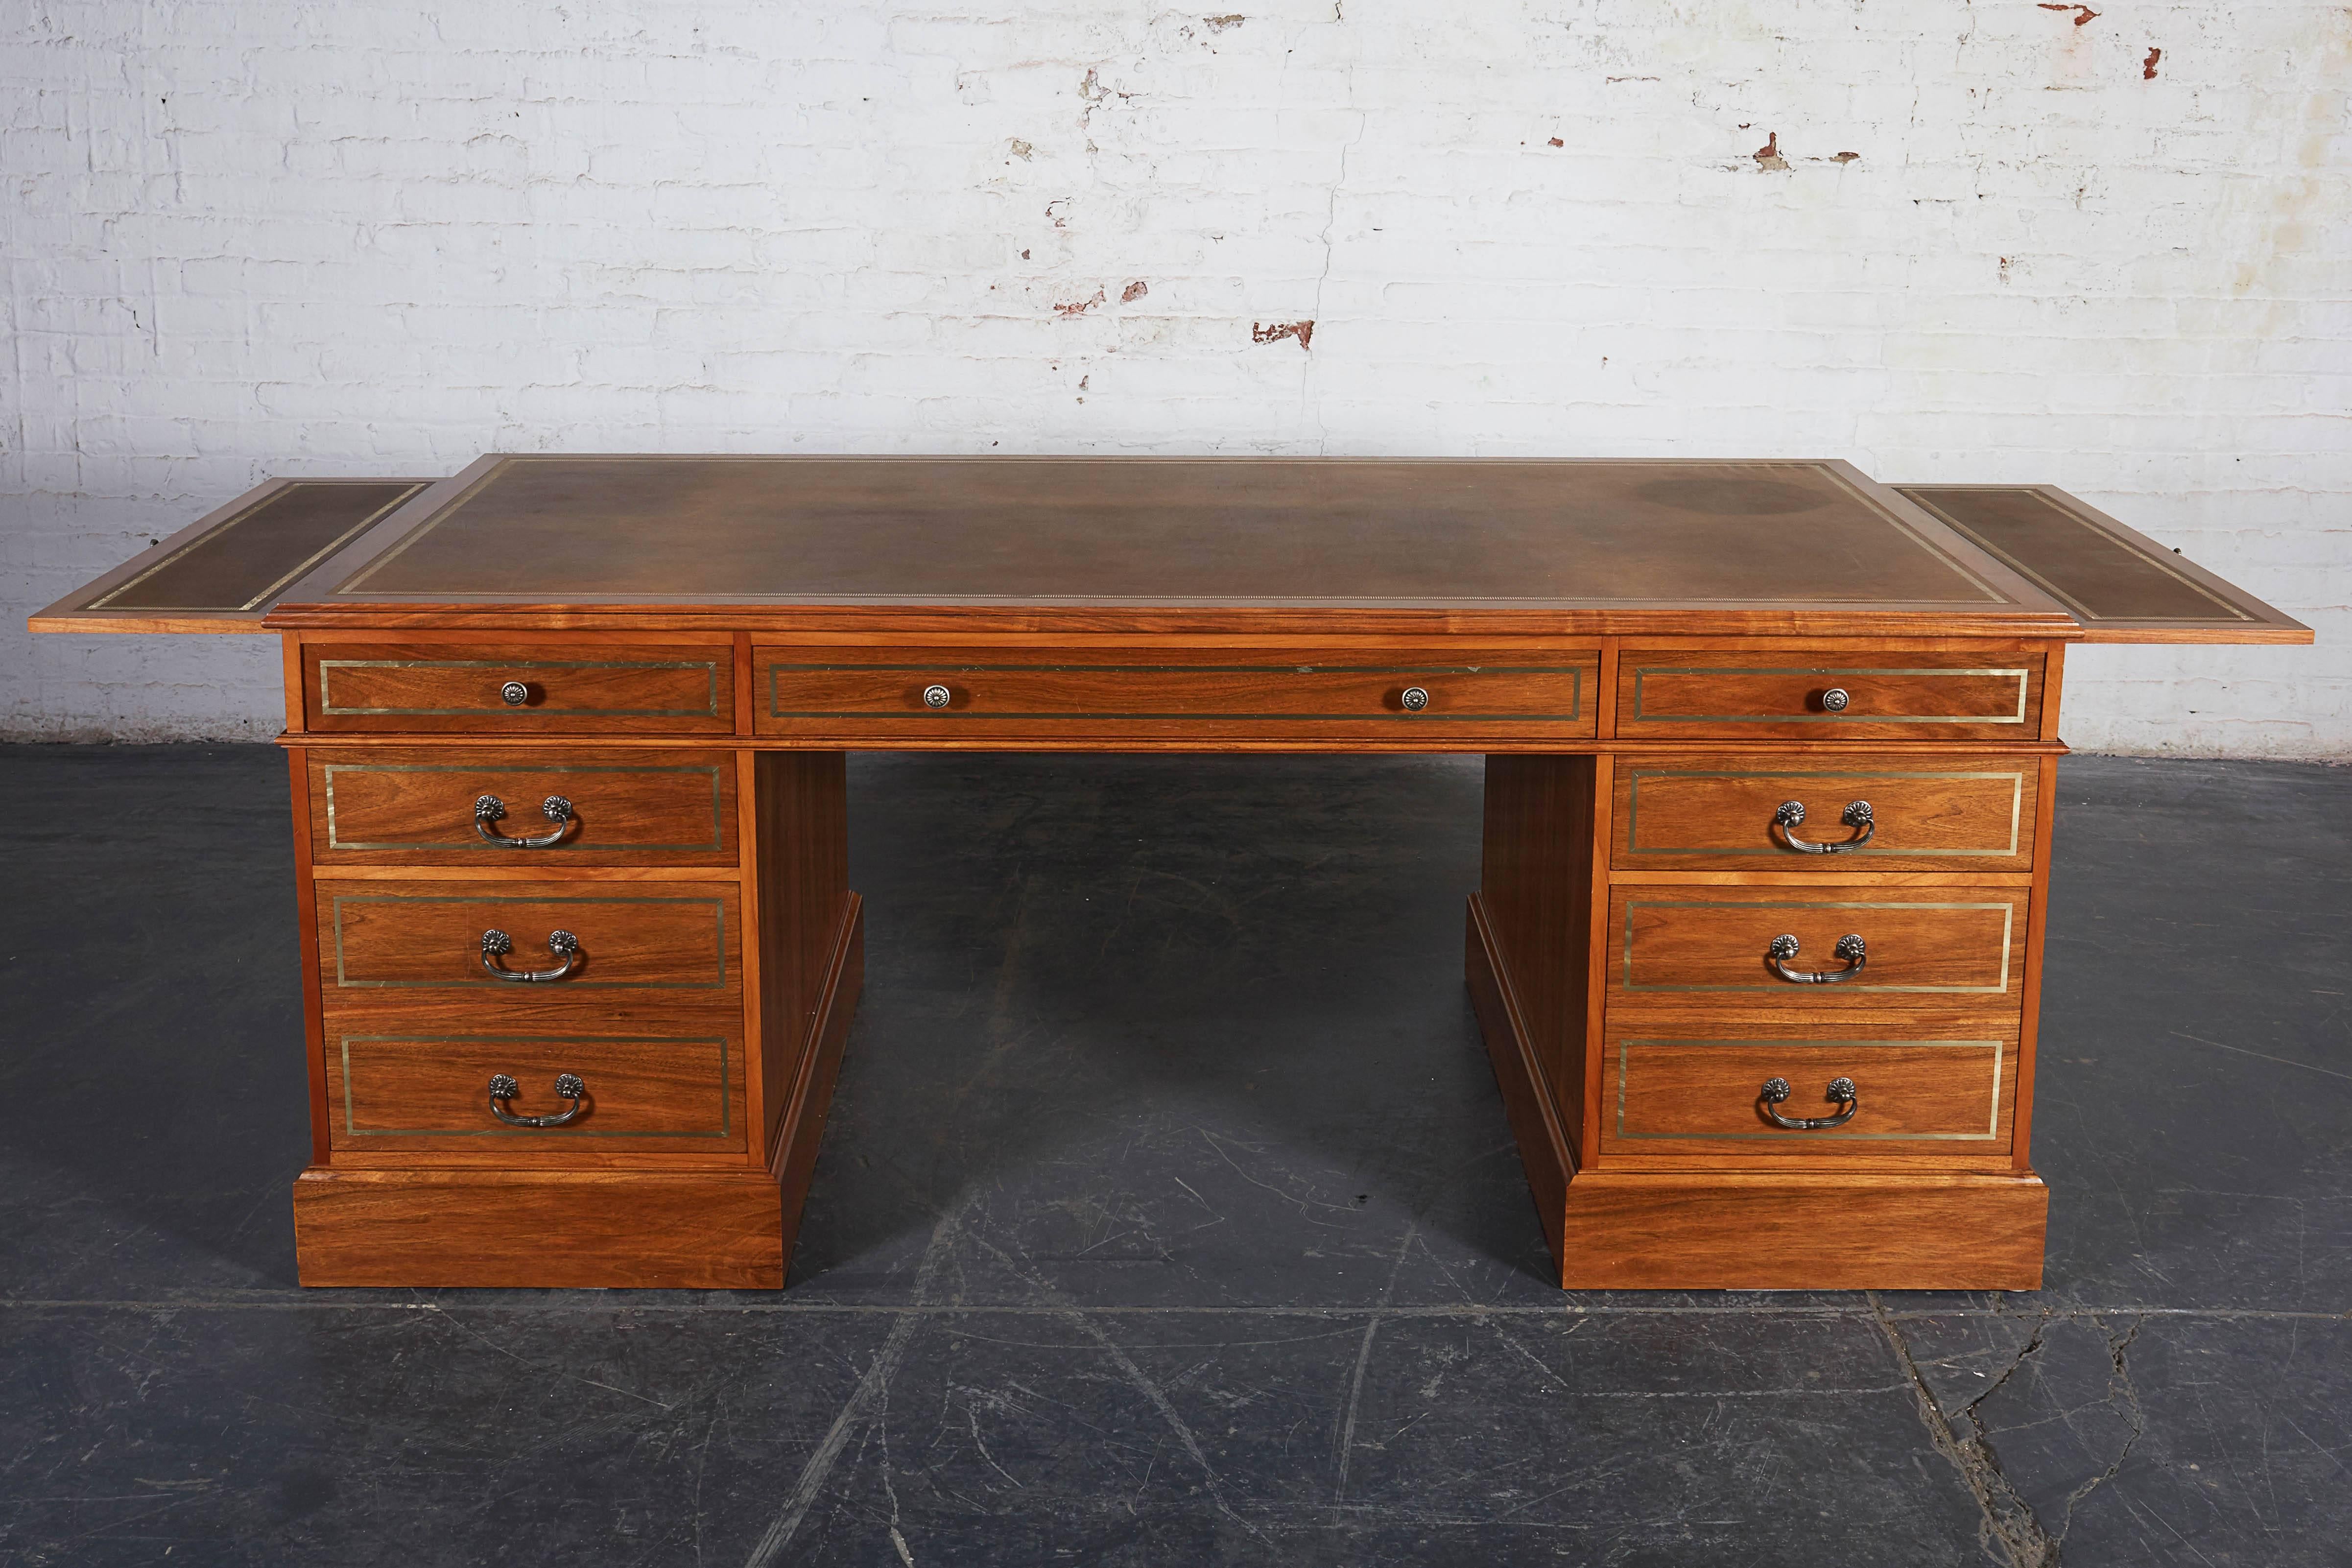 Bench made in England by Charles Manners of Manners & Co. With tooled leather top; inset with nickel banding throughout and featuring custom nickel hardware by P.E. Guerin. One side fitted with drawers including two file-hanging drawers and the